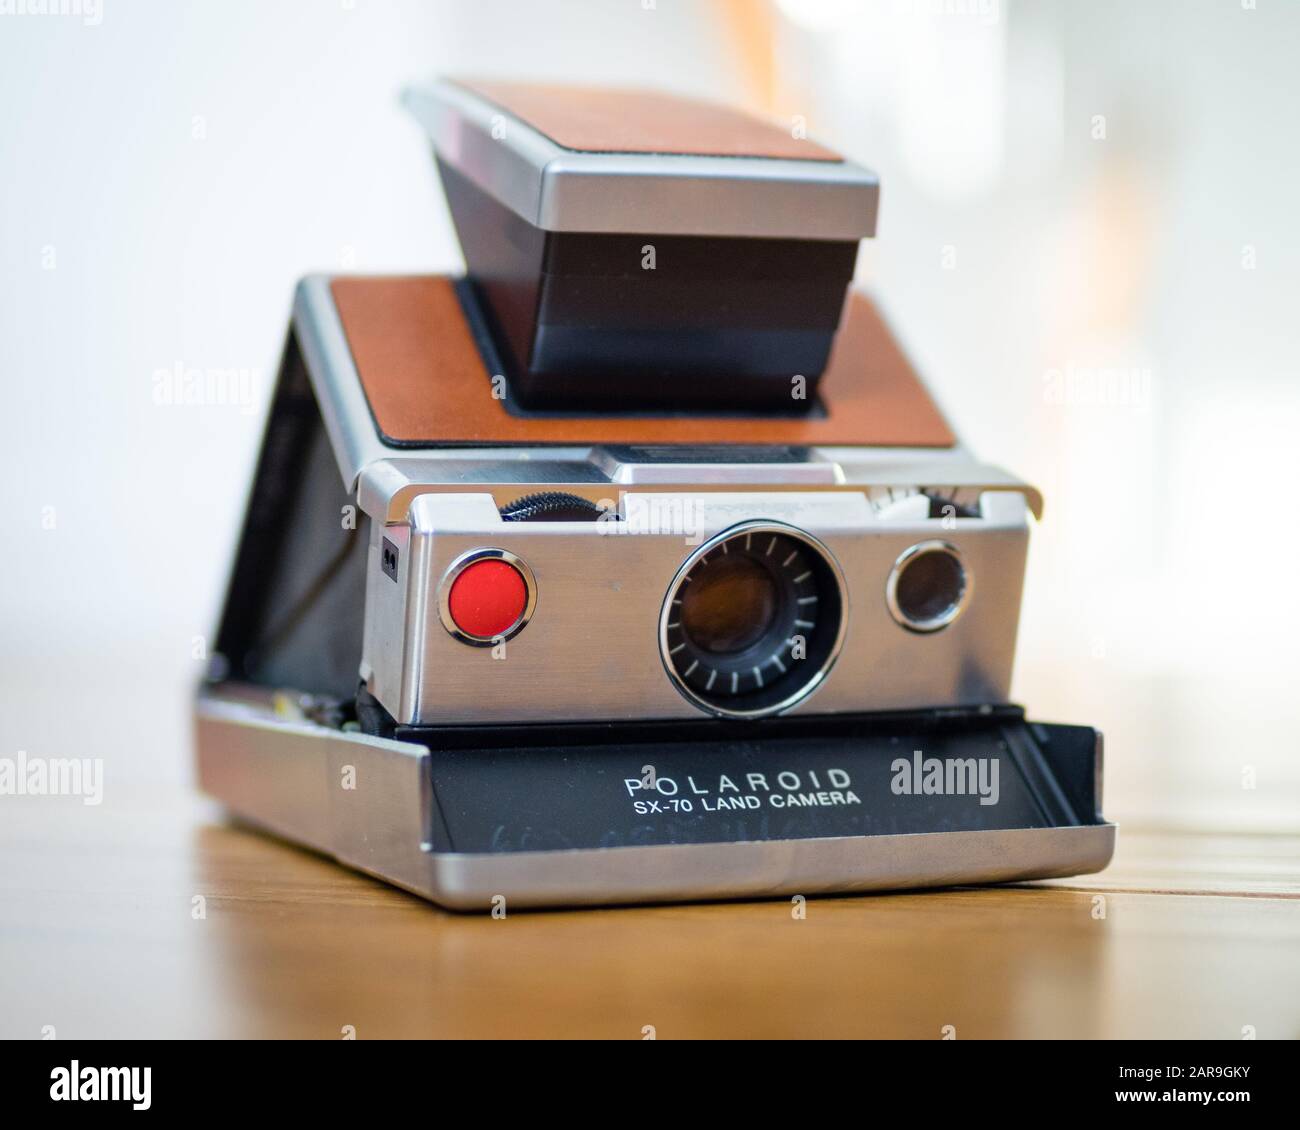 An original Polaroid SX-70 Land Camera, a folding single lens reflex  instant camera which was first produced by the Polaroid Corporation in 1972  Stock Photo - Alamy